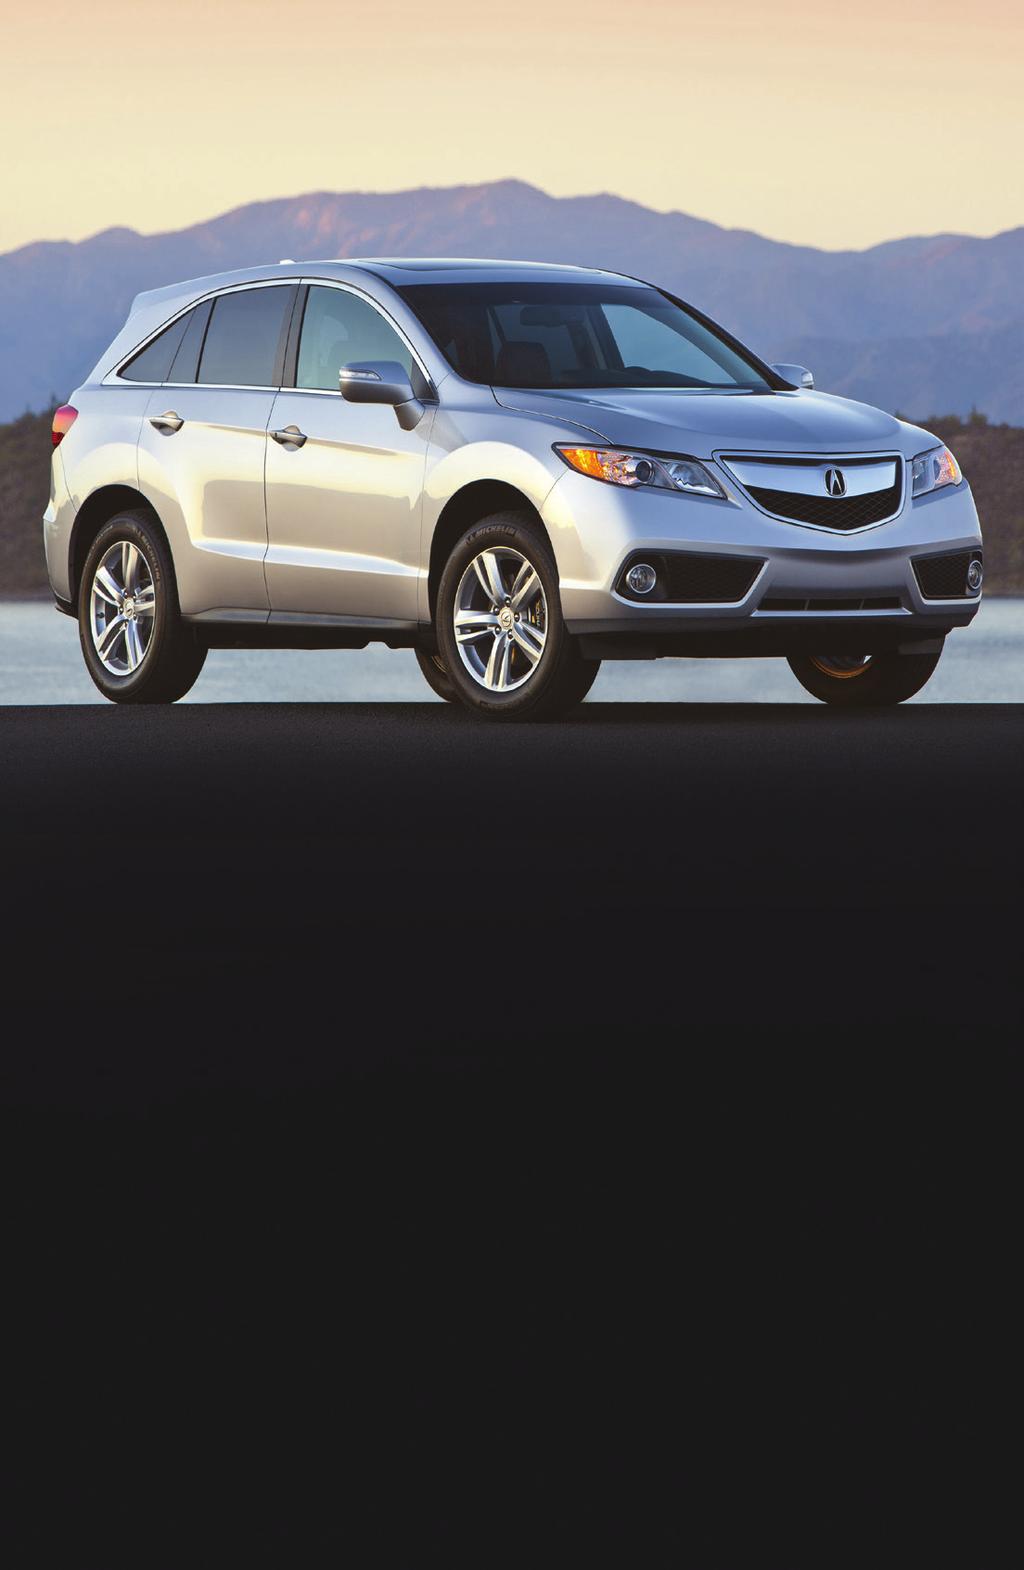 FRONTLINE January 2015 Vol 17 Issue 1 Dedicated to the Success of the Acura Retail Sales Professional The Winning Edge: RDX Bests BMW X3 (and Toyota Highlander) RDX demonstrates why it s the market